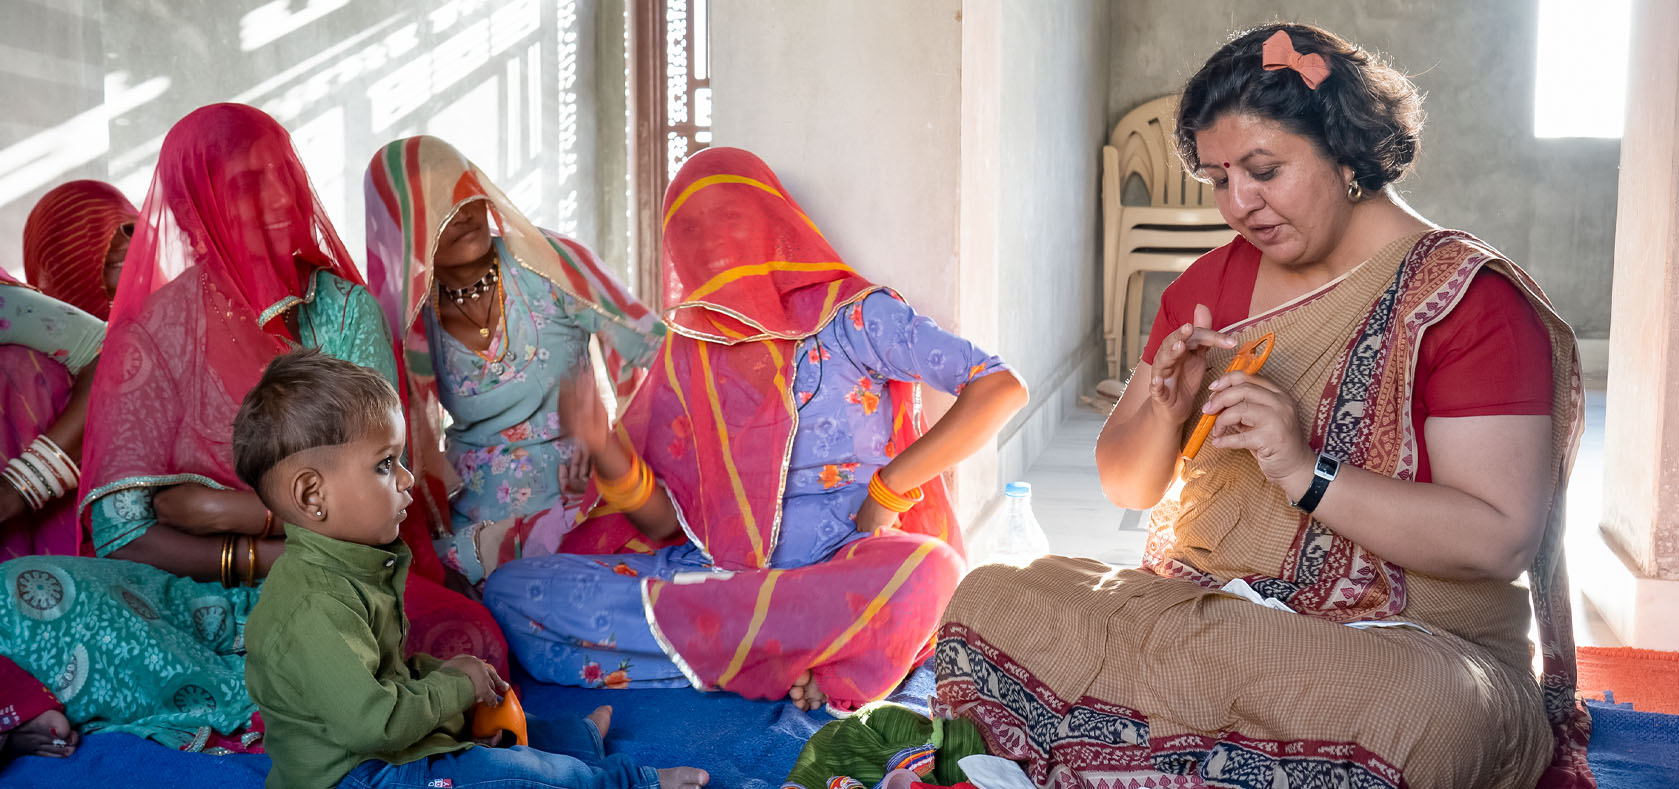 Malini Parmer, founder of Stonesoup, in an informal session with women in Barmer, Rajasthan, on menstrual hygiene management and the use of sustainable products. Photo: UN Women/Ruhani Kaur